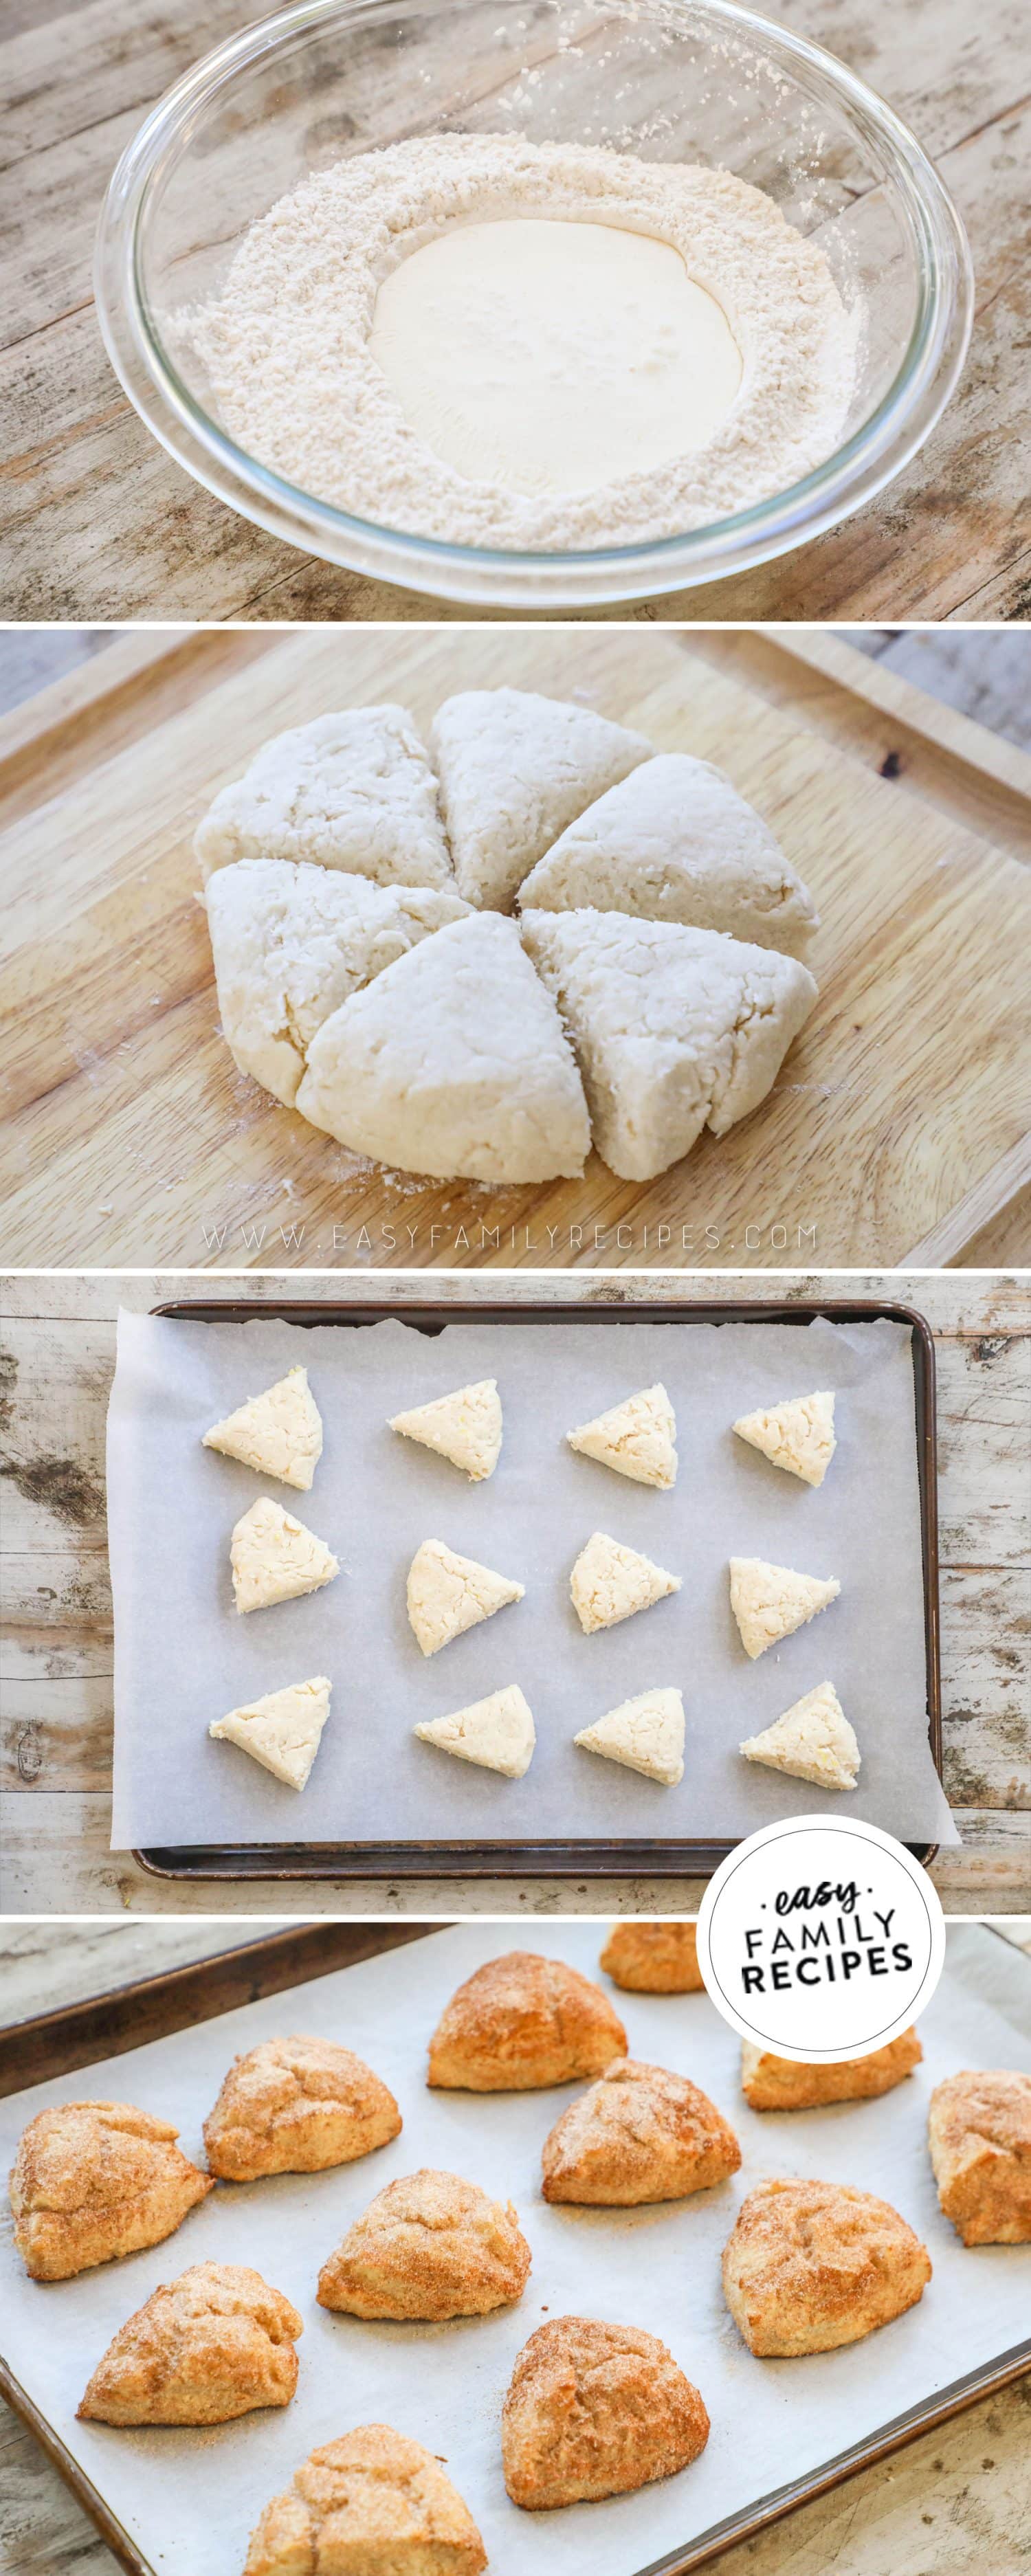 how to make cinnamon sugar scones 1) make the dough, 2) roll out and cut the dough, 3) line on a baking sheet, 4)bake and serve!